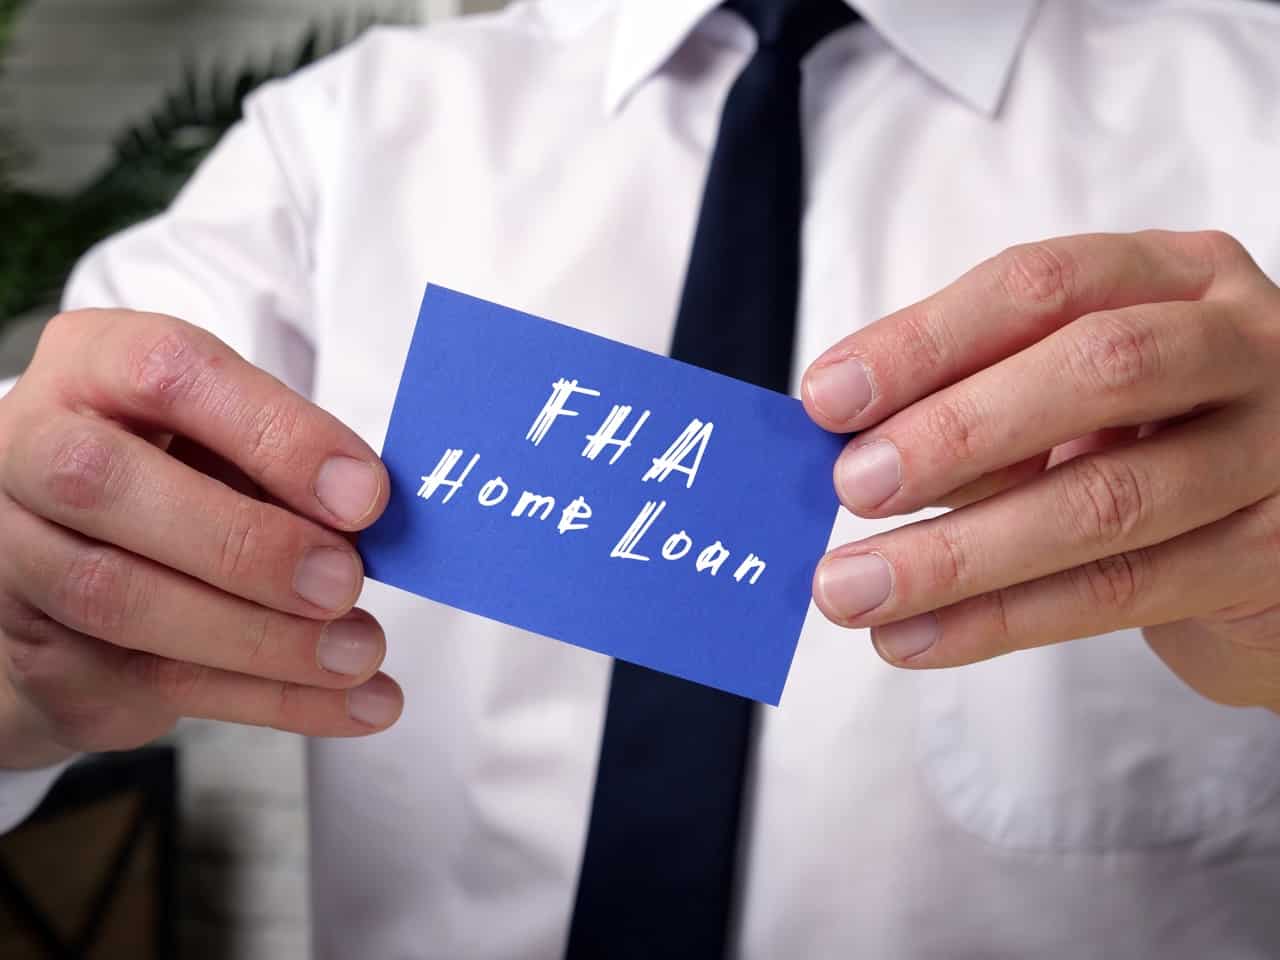 Federal Housing Administration FHA Home Loan sign on the piece of paper.